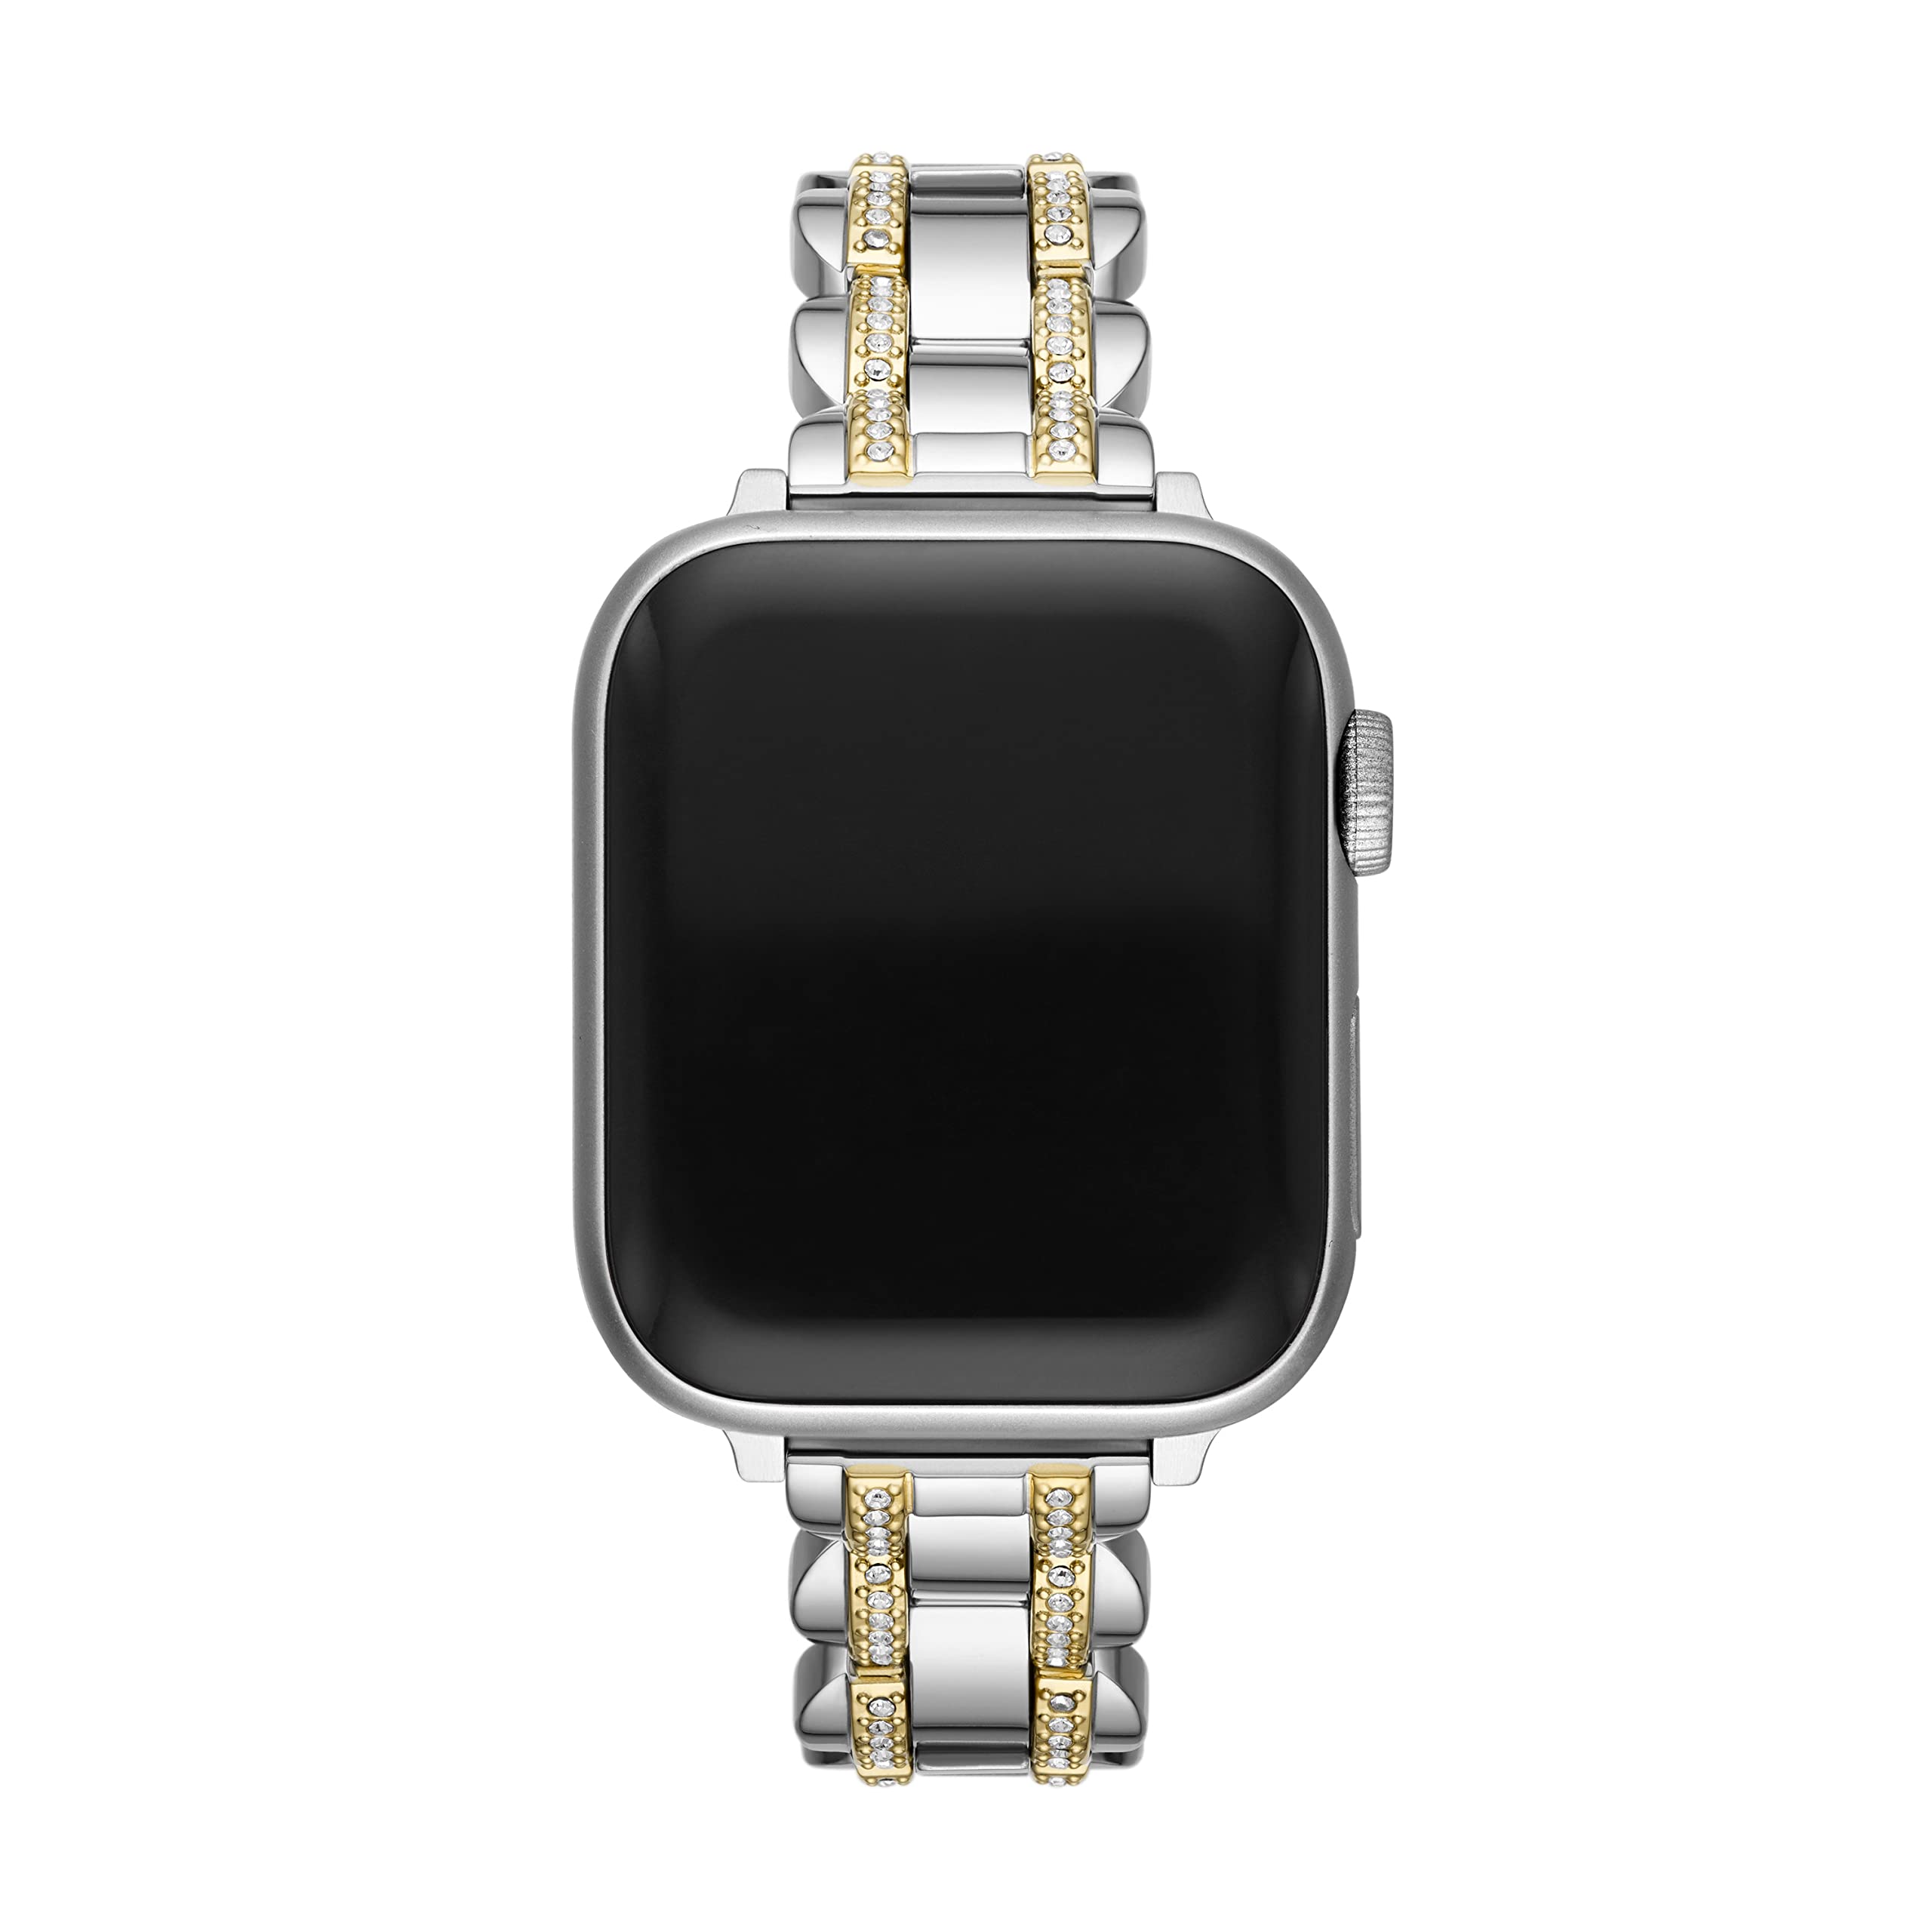 Kate Spade New York Interchangeable Stainless Steel Band Compatible with Your 38/40mm Apple Watch- Straps for Apple Watch Series 8/7/6/5/4/3/2/1/SE